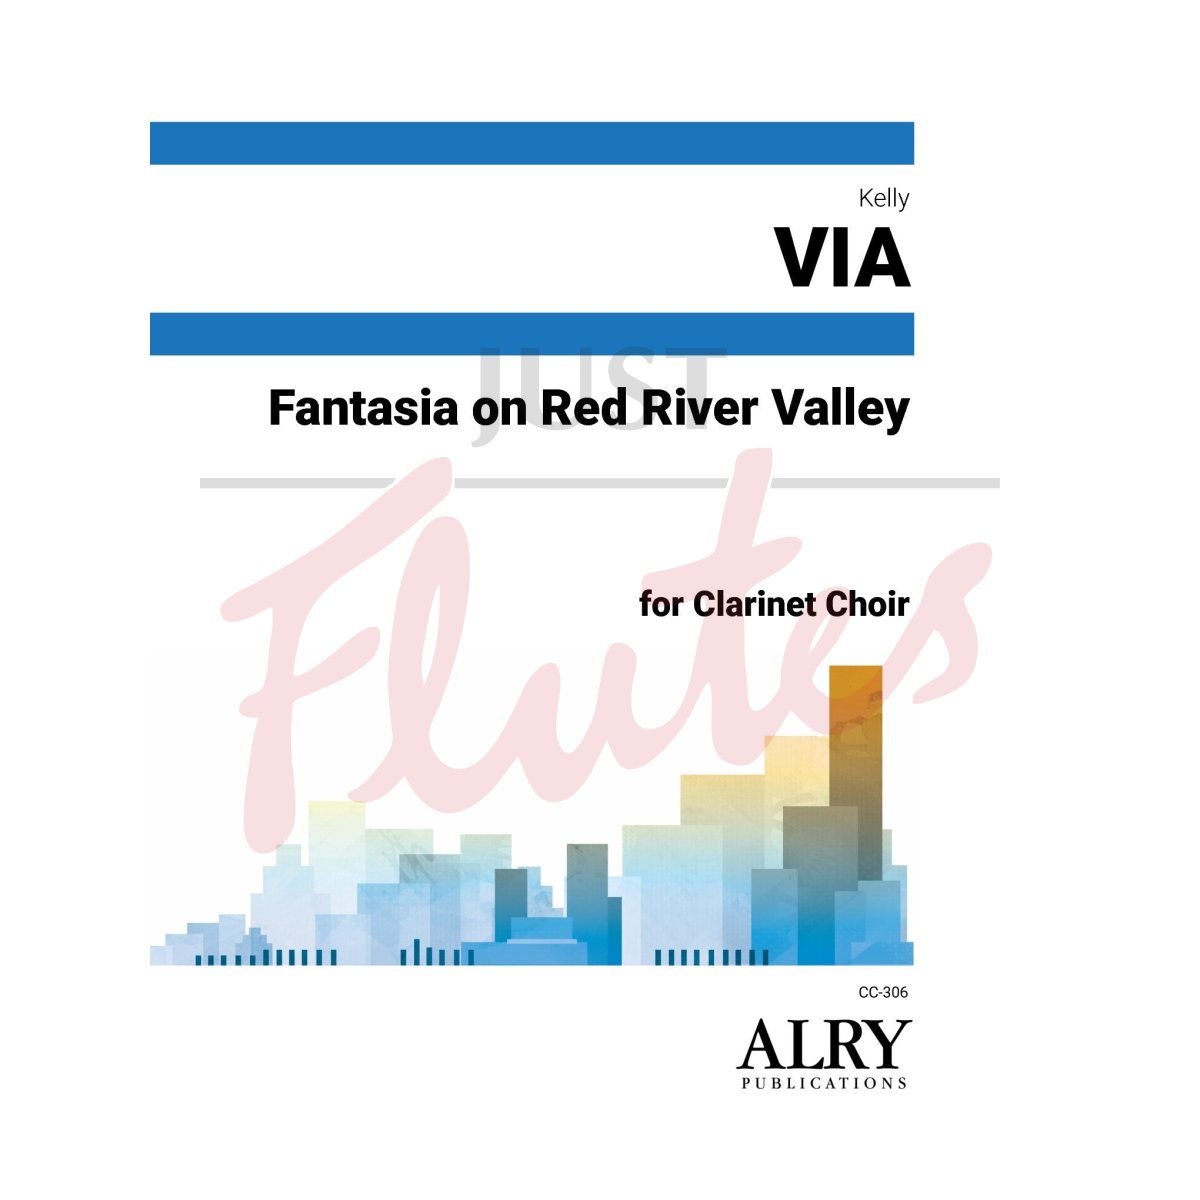 Fantasia on Red River Valley for Clarinet Choir